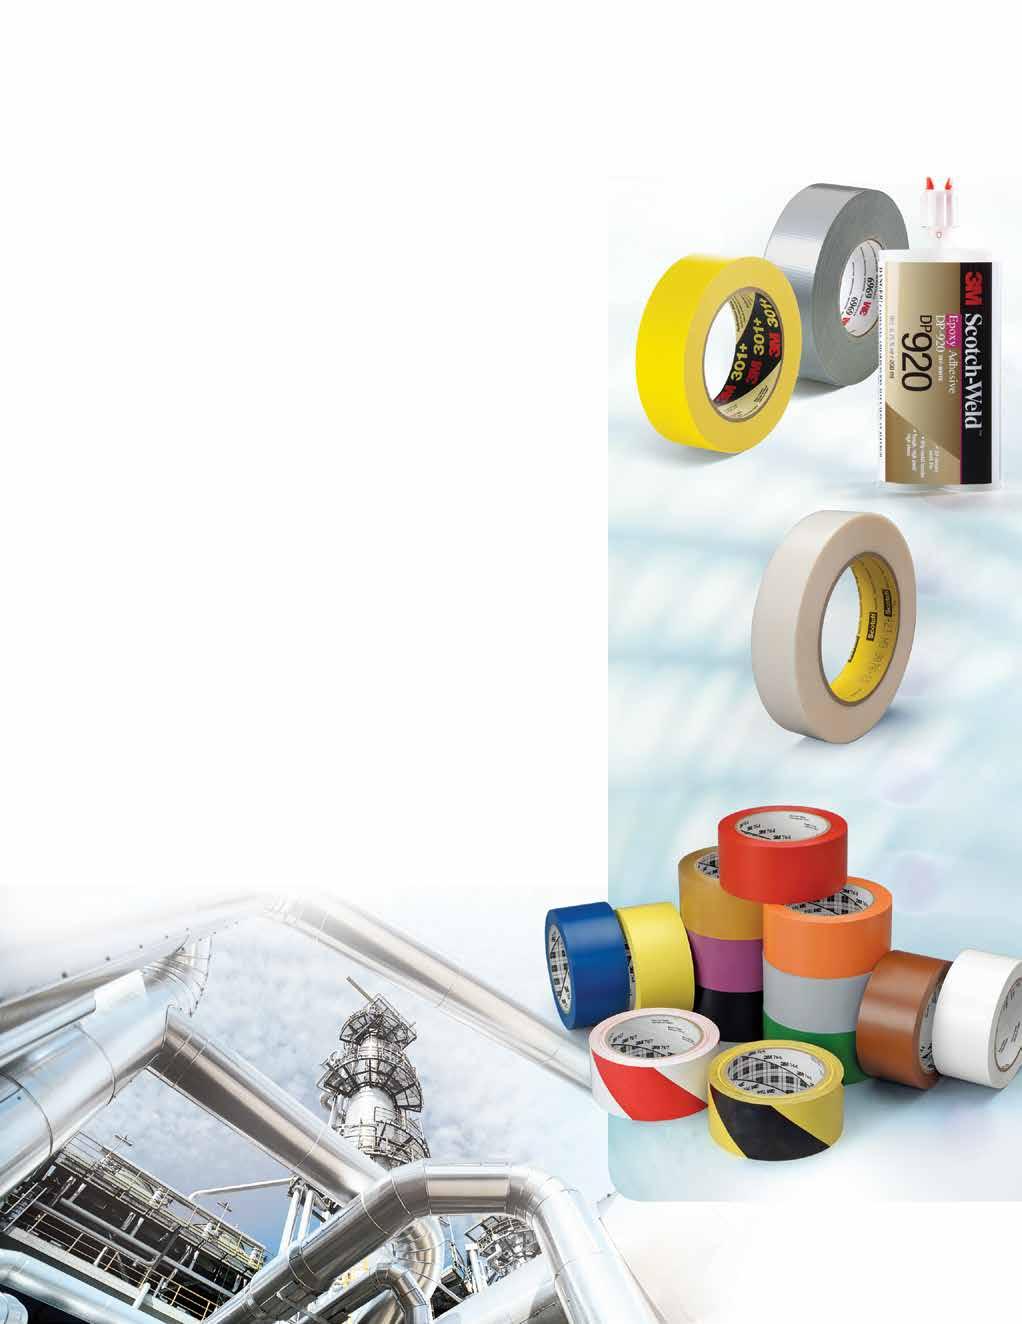 Pipe Fitting and Protection Oil and Gas 3M Performance Yellow Masking Tape 301+ 3M Duct Tape 6969 3M Scotch-Weld Epoxy Adhesive DP920 Piping is the backbone of the Oil and Gas Industry.